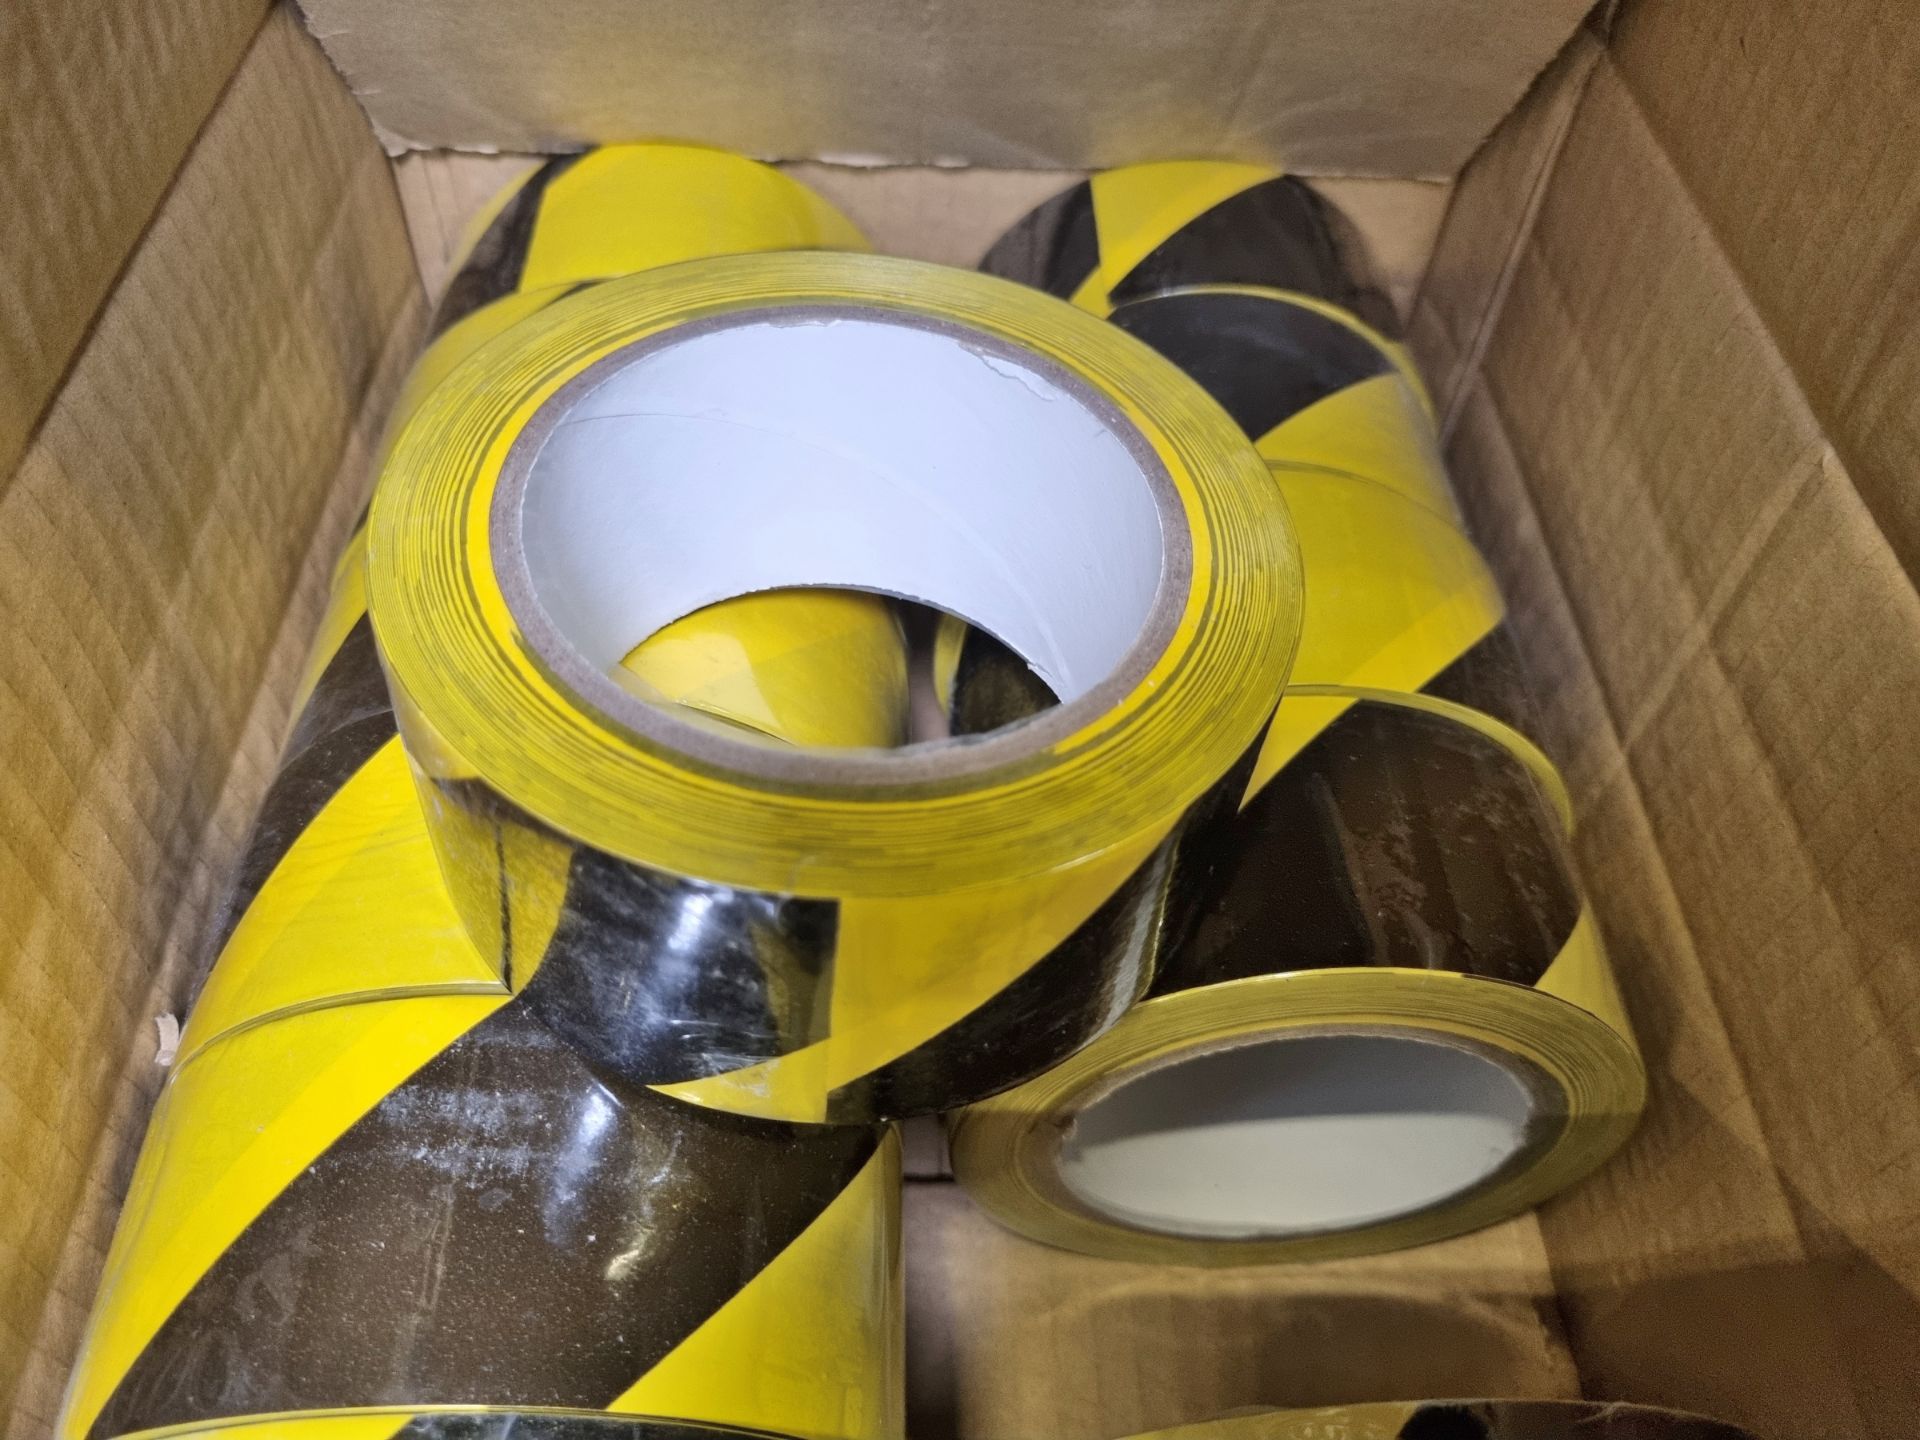 3x boxes of Black and yellow hazard tape - 12 rolls per box - Image 4 of 4